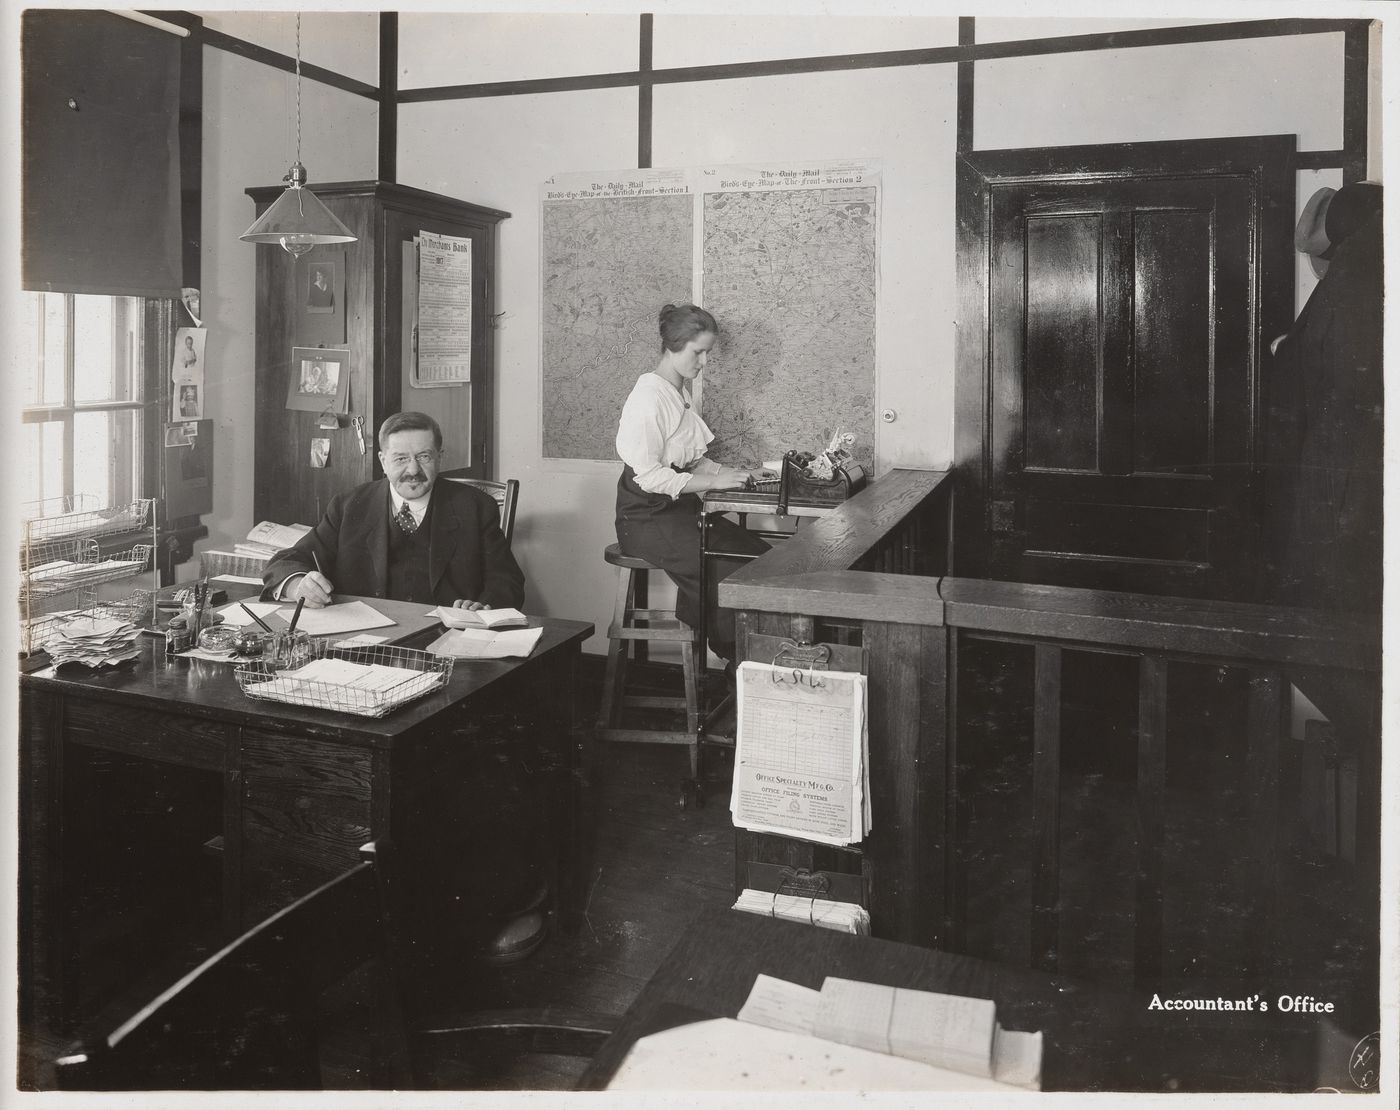 Interior view of accountant's office at the Energite Explosives Plant No. 3, the Shell Loading Plant, Renfrew, Ontario, Canada